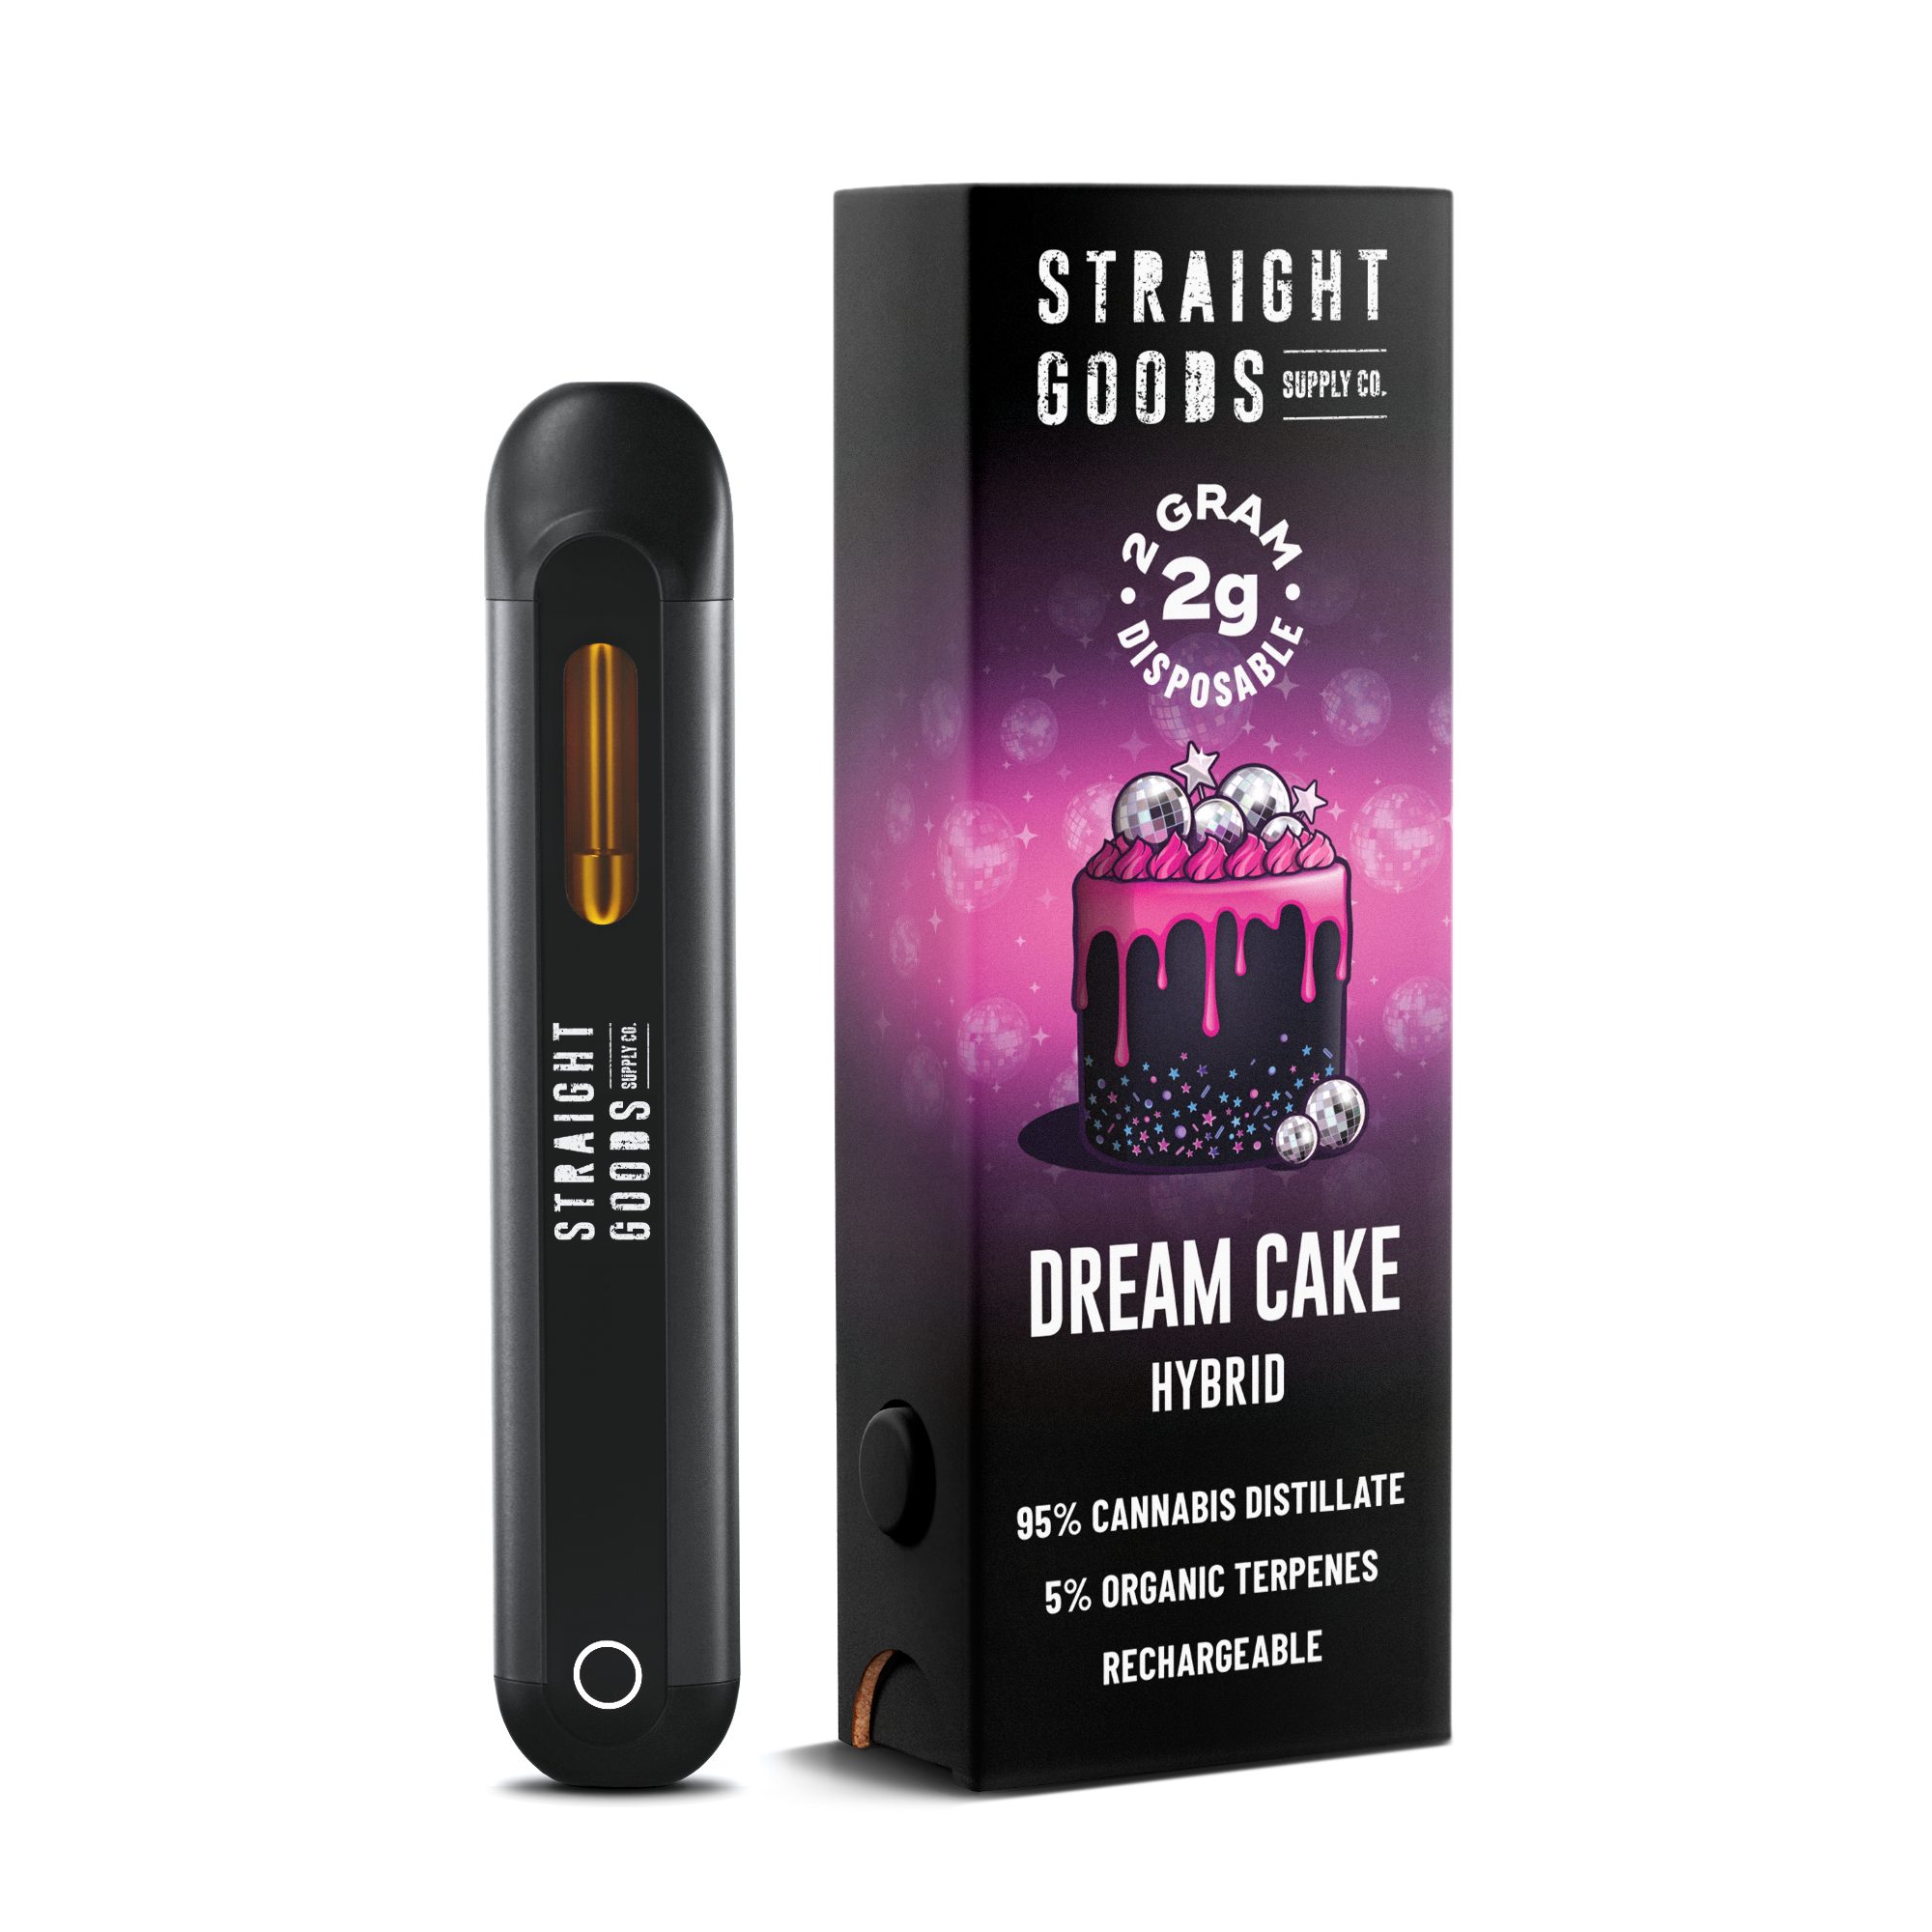 Buy Straight Goods - Dream Cake 2G Disposable Pen (Hybrid) at Wccannabis Online Shop